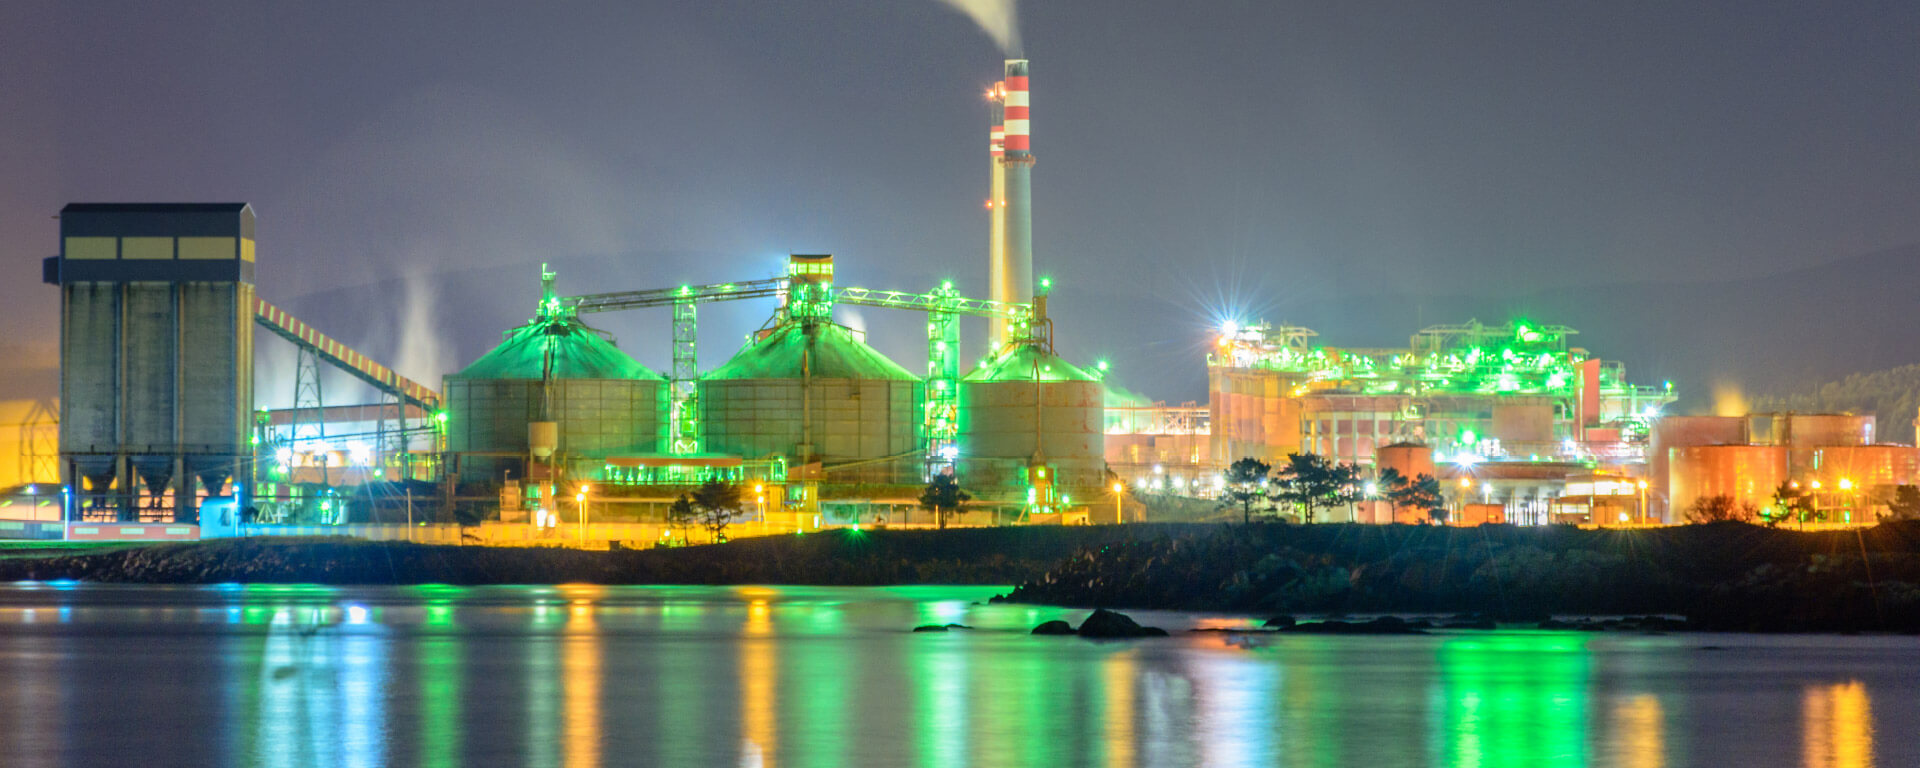 Industrial plant in front of a night sky in green illumination